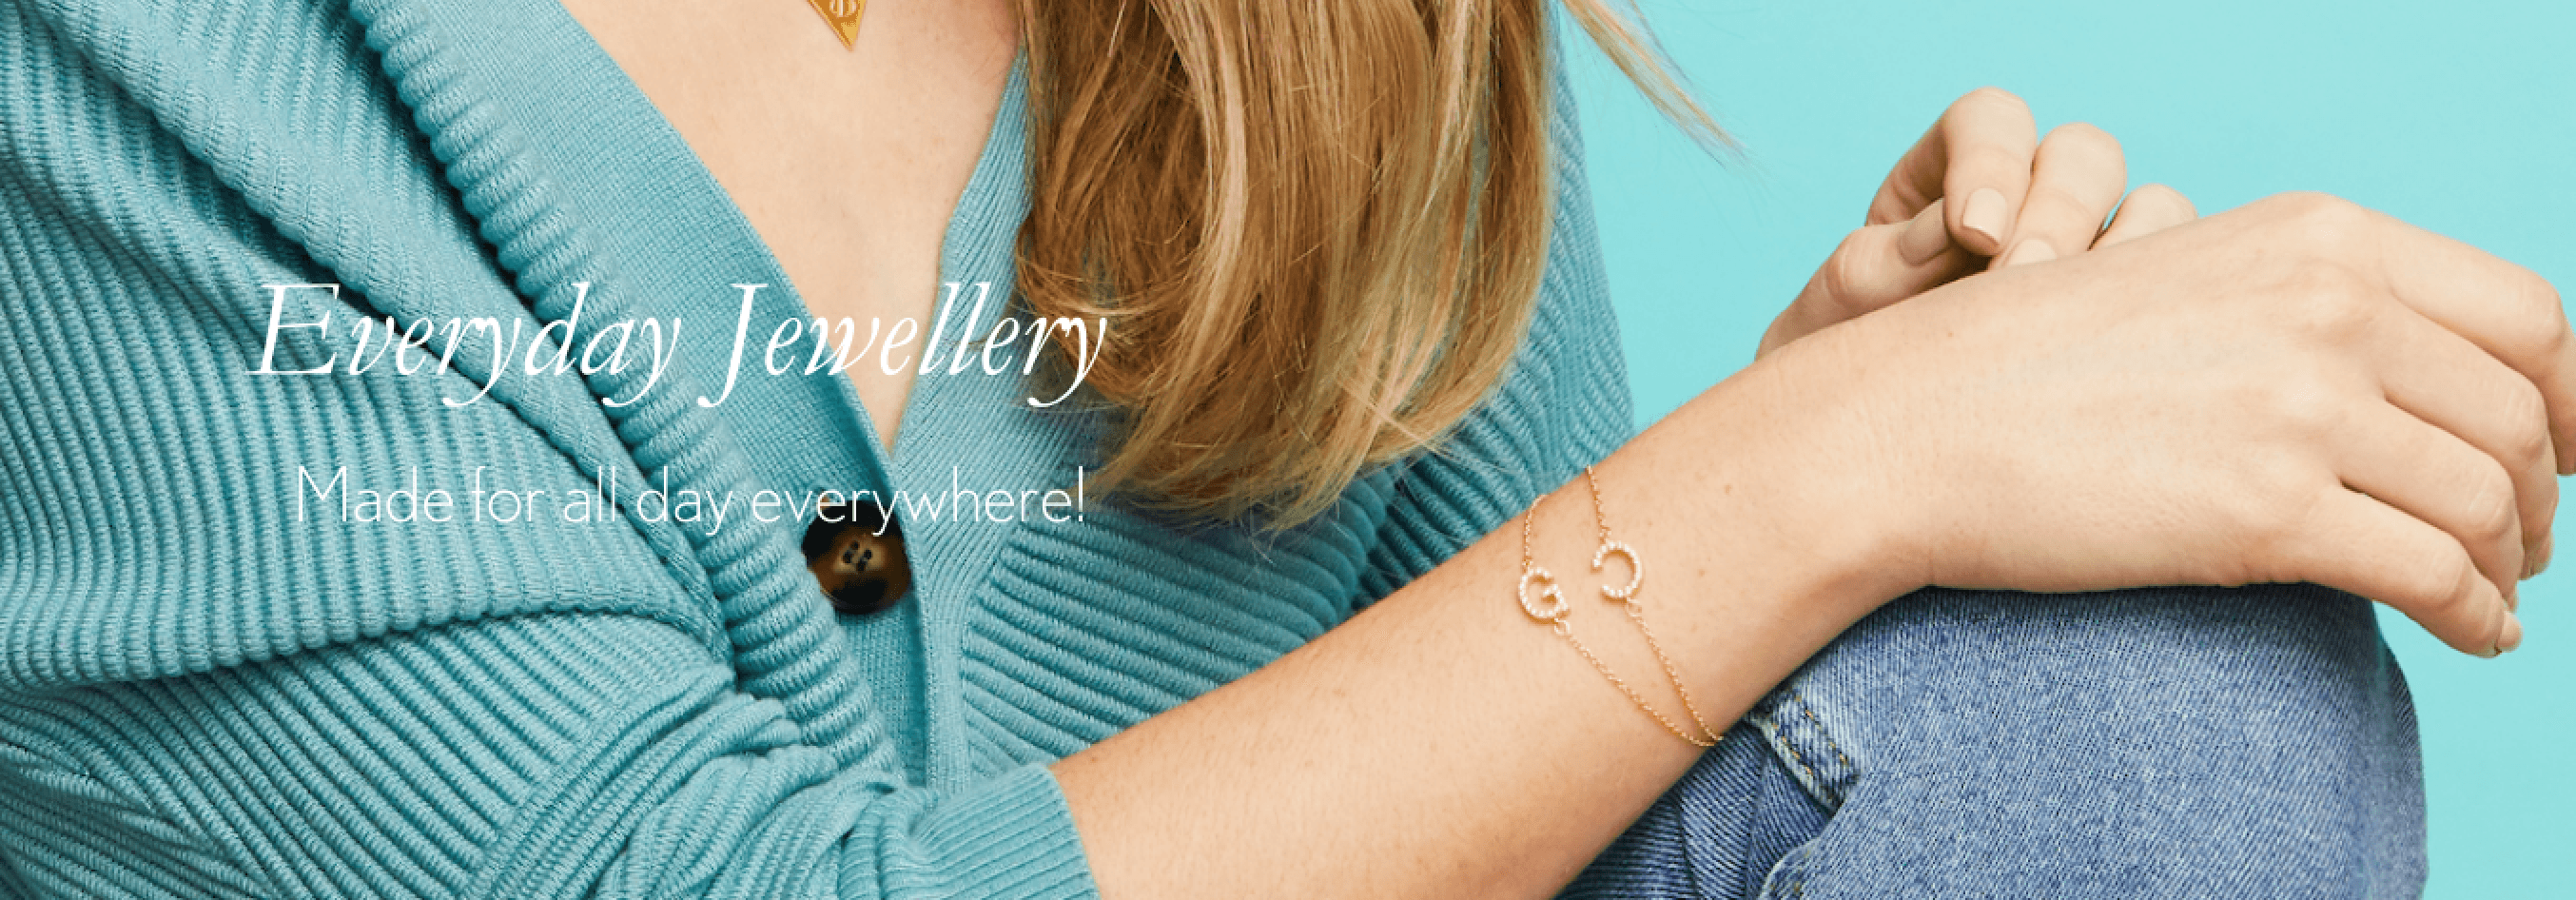 Everyday Collection - Anna Lou of London